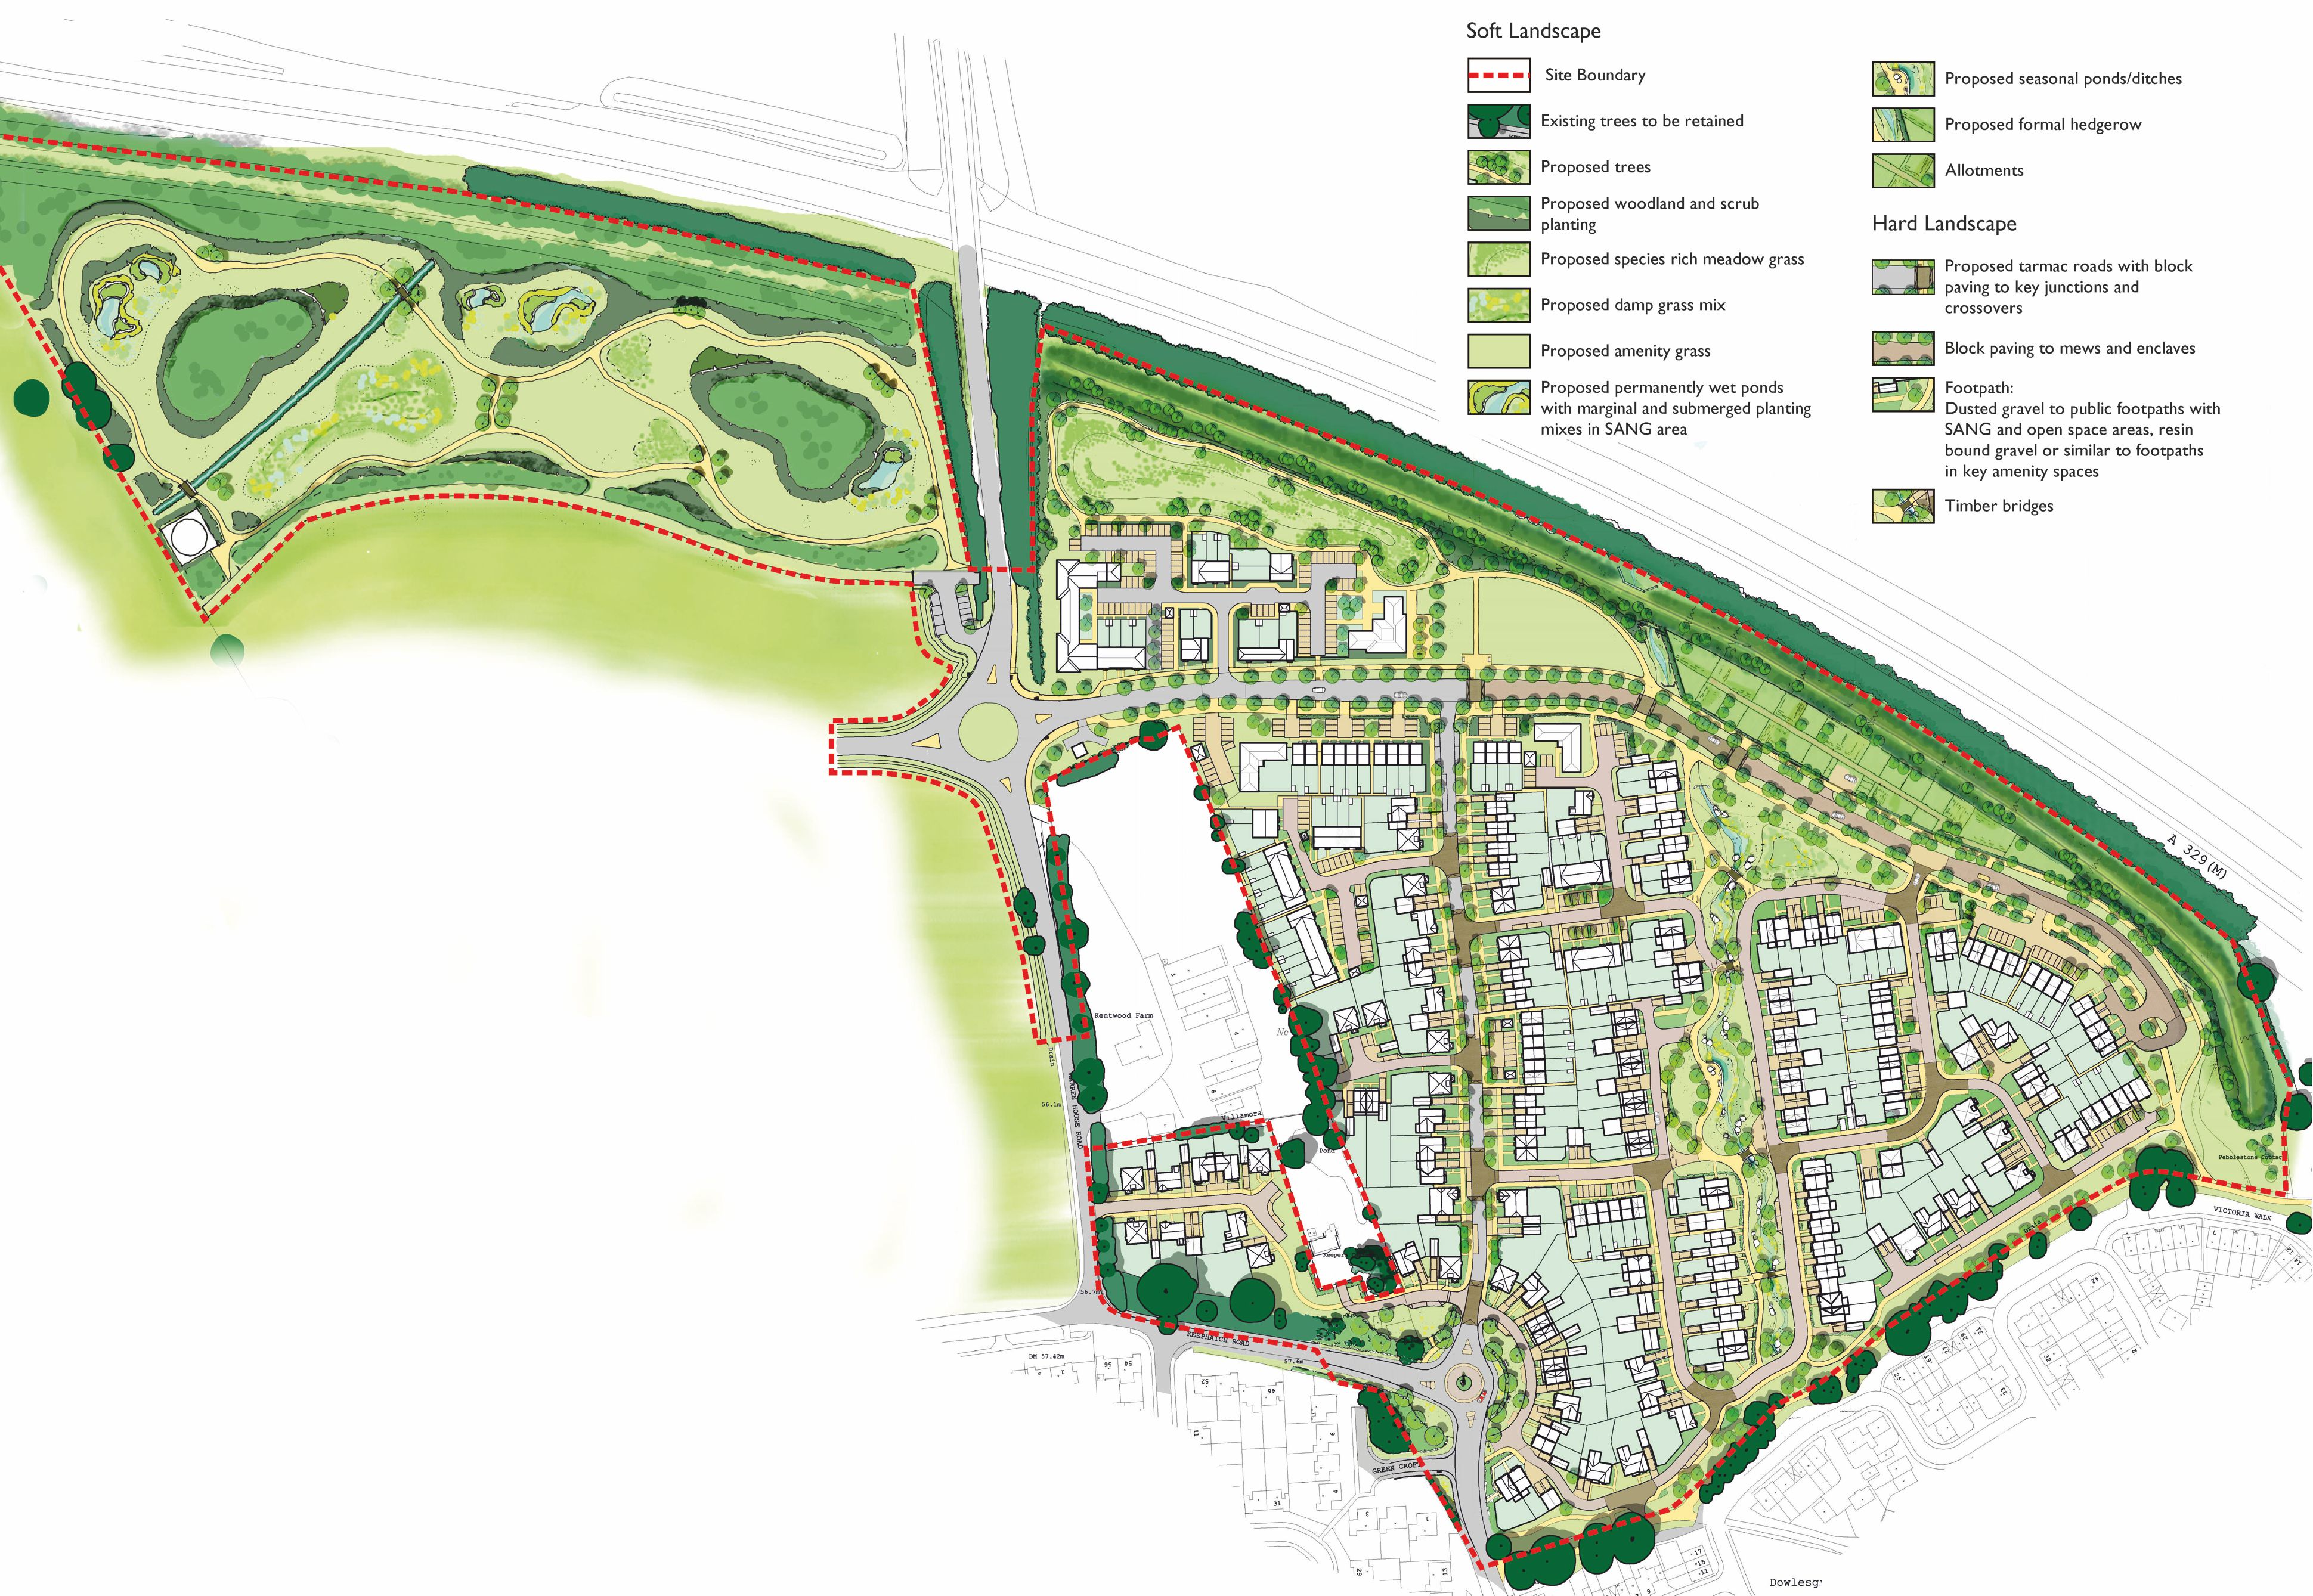 Landscape masterplan for Kentwood with SANGS and park